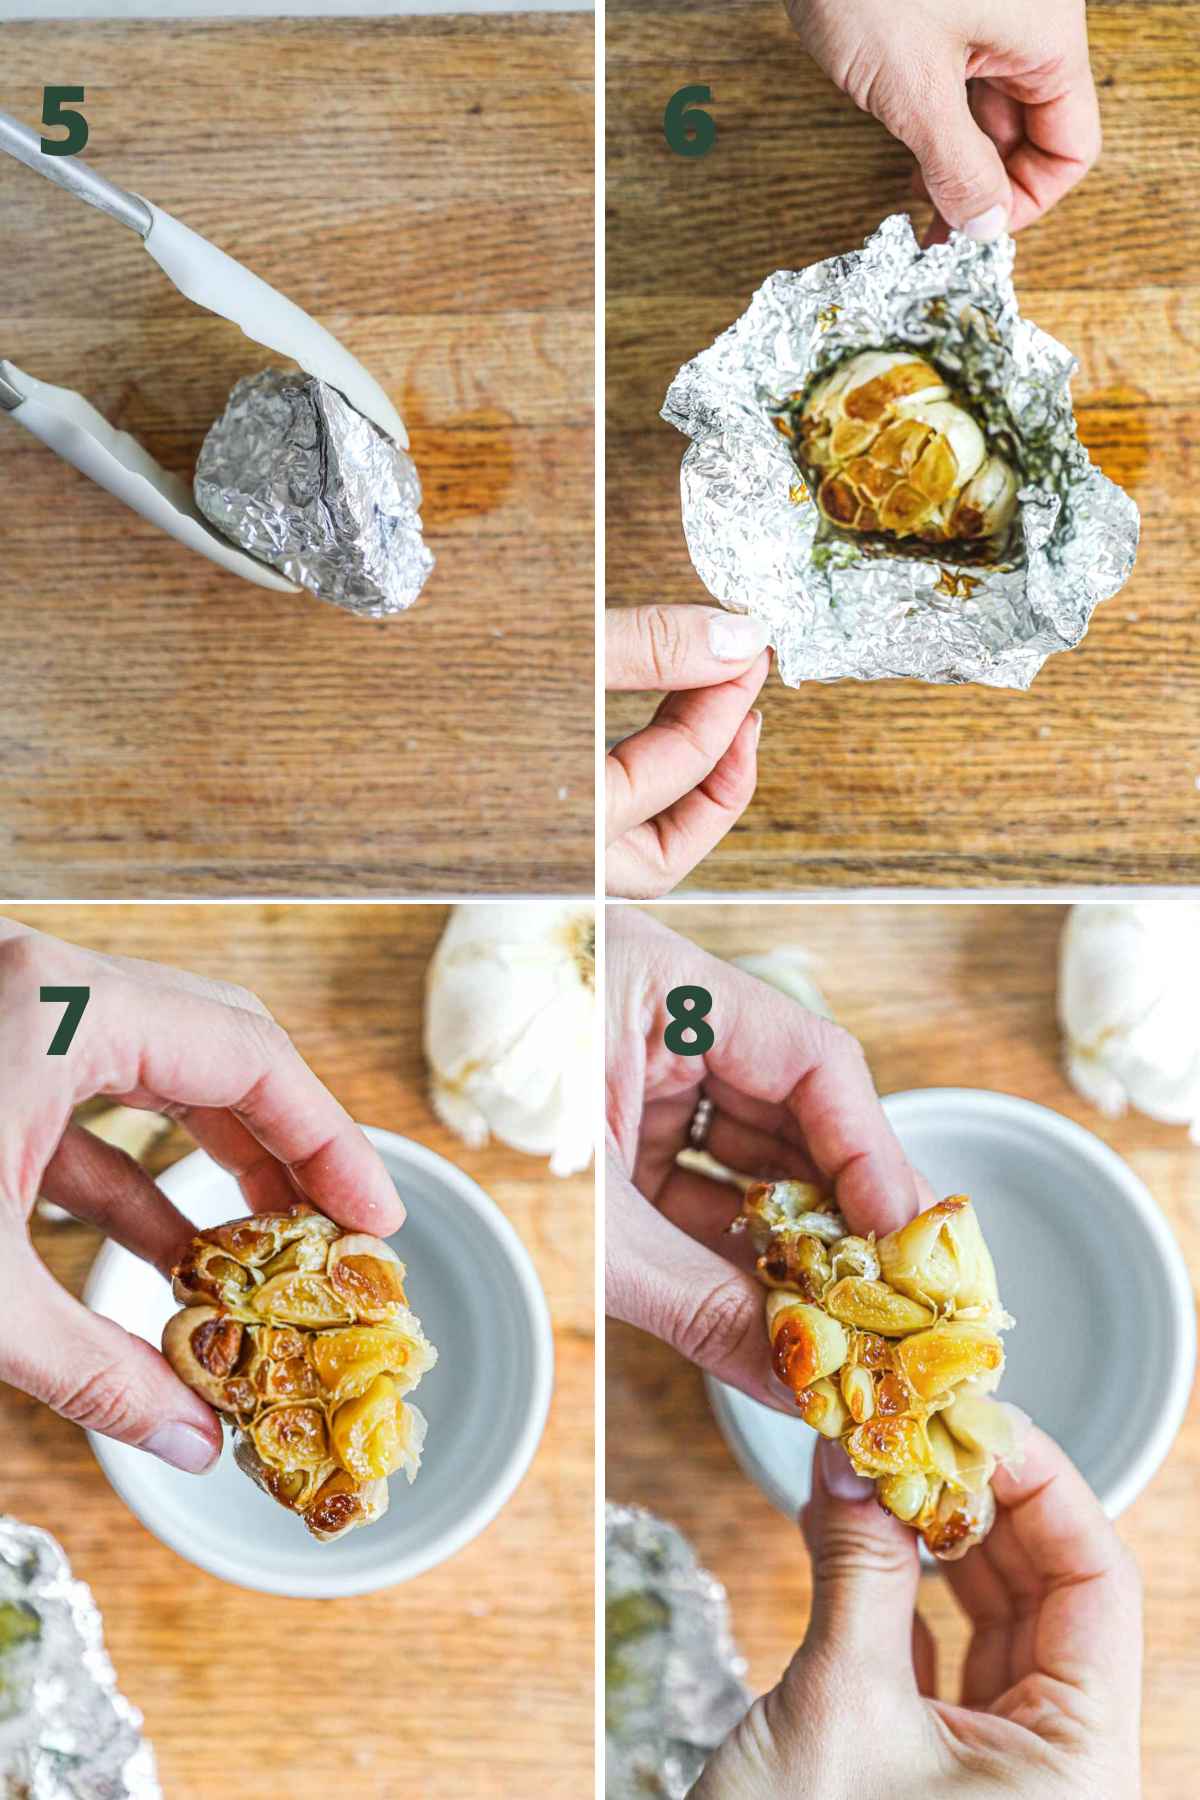 Steps to make oven-roasted garlic (in aluminum foil), including roasting the garlic in aluminum foil, opening the foil, and squeezing out the garlic cloves from the garlic skins.